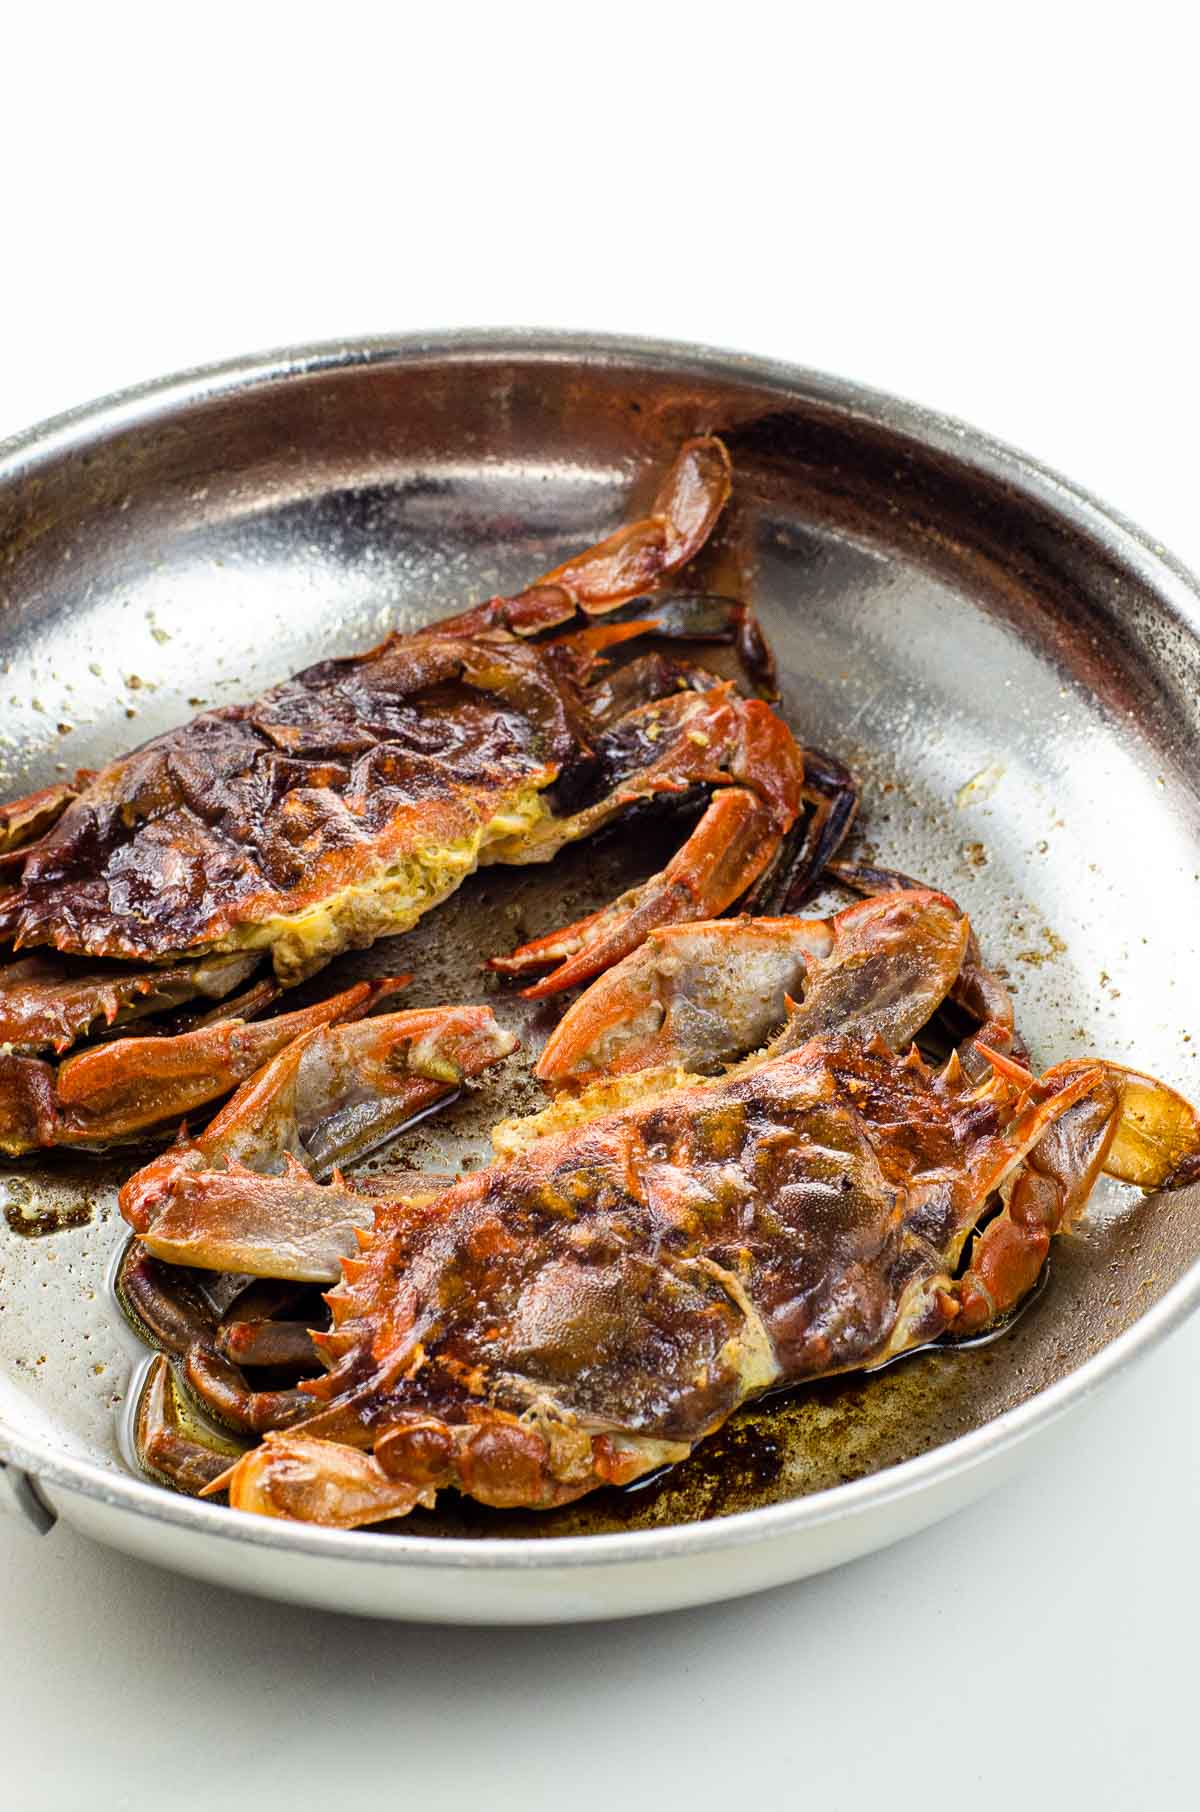 simple soft shell crab recipe sautéed without flour, in a frying pan